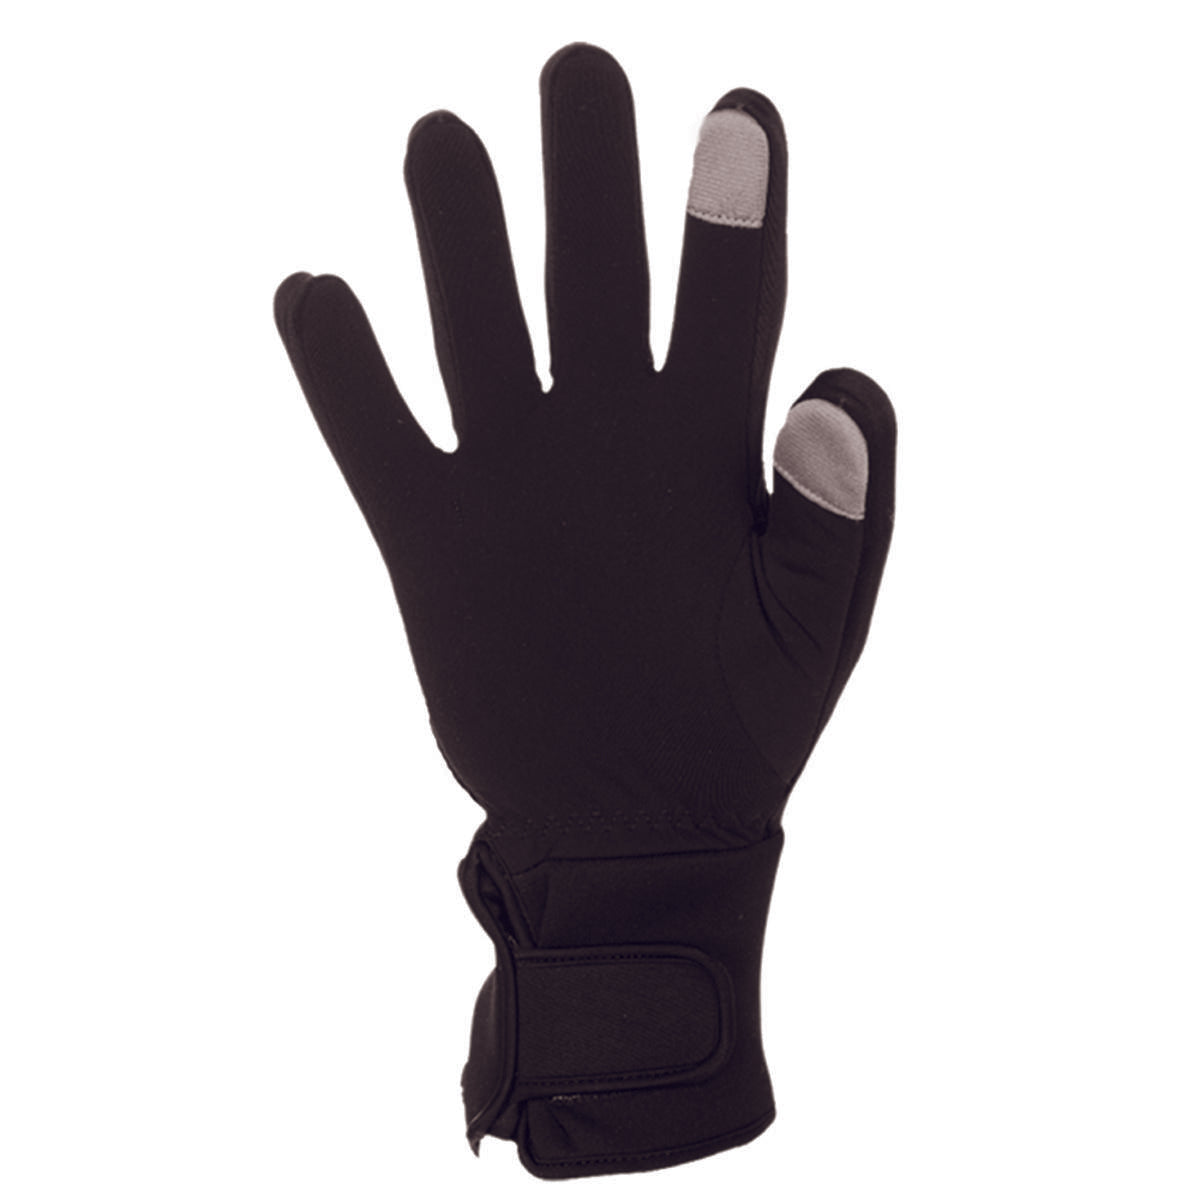 Mobile Warming - Unisex 7.4V Battery Powered Heated Glove Liner (Bluetooth enabled)